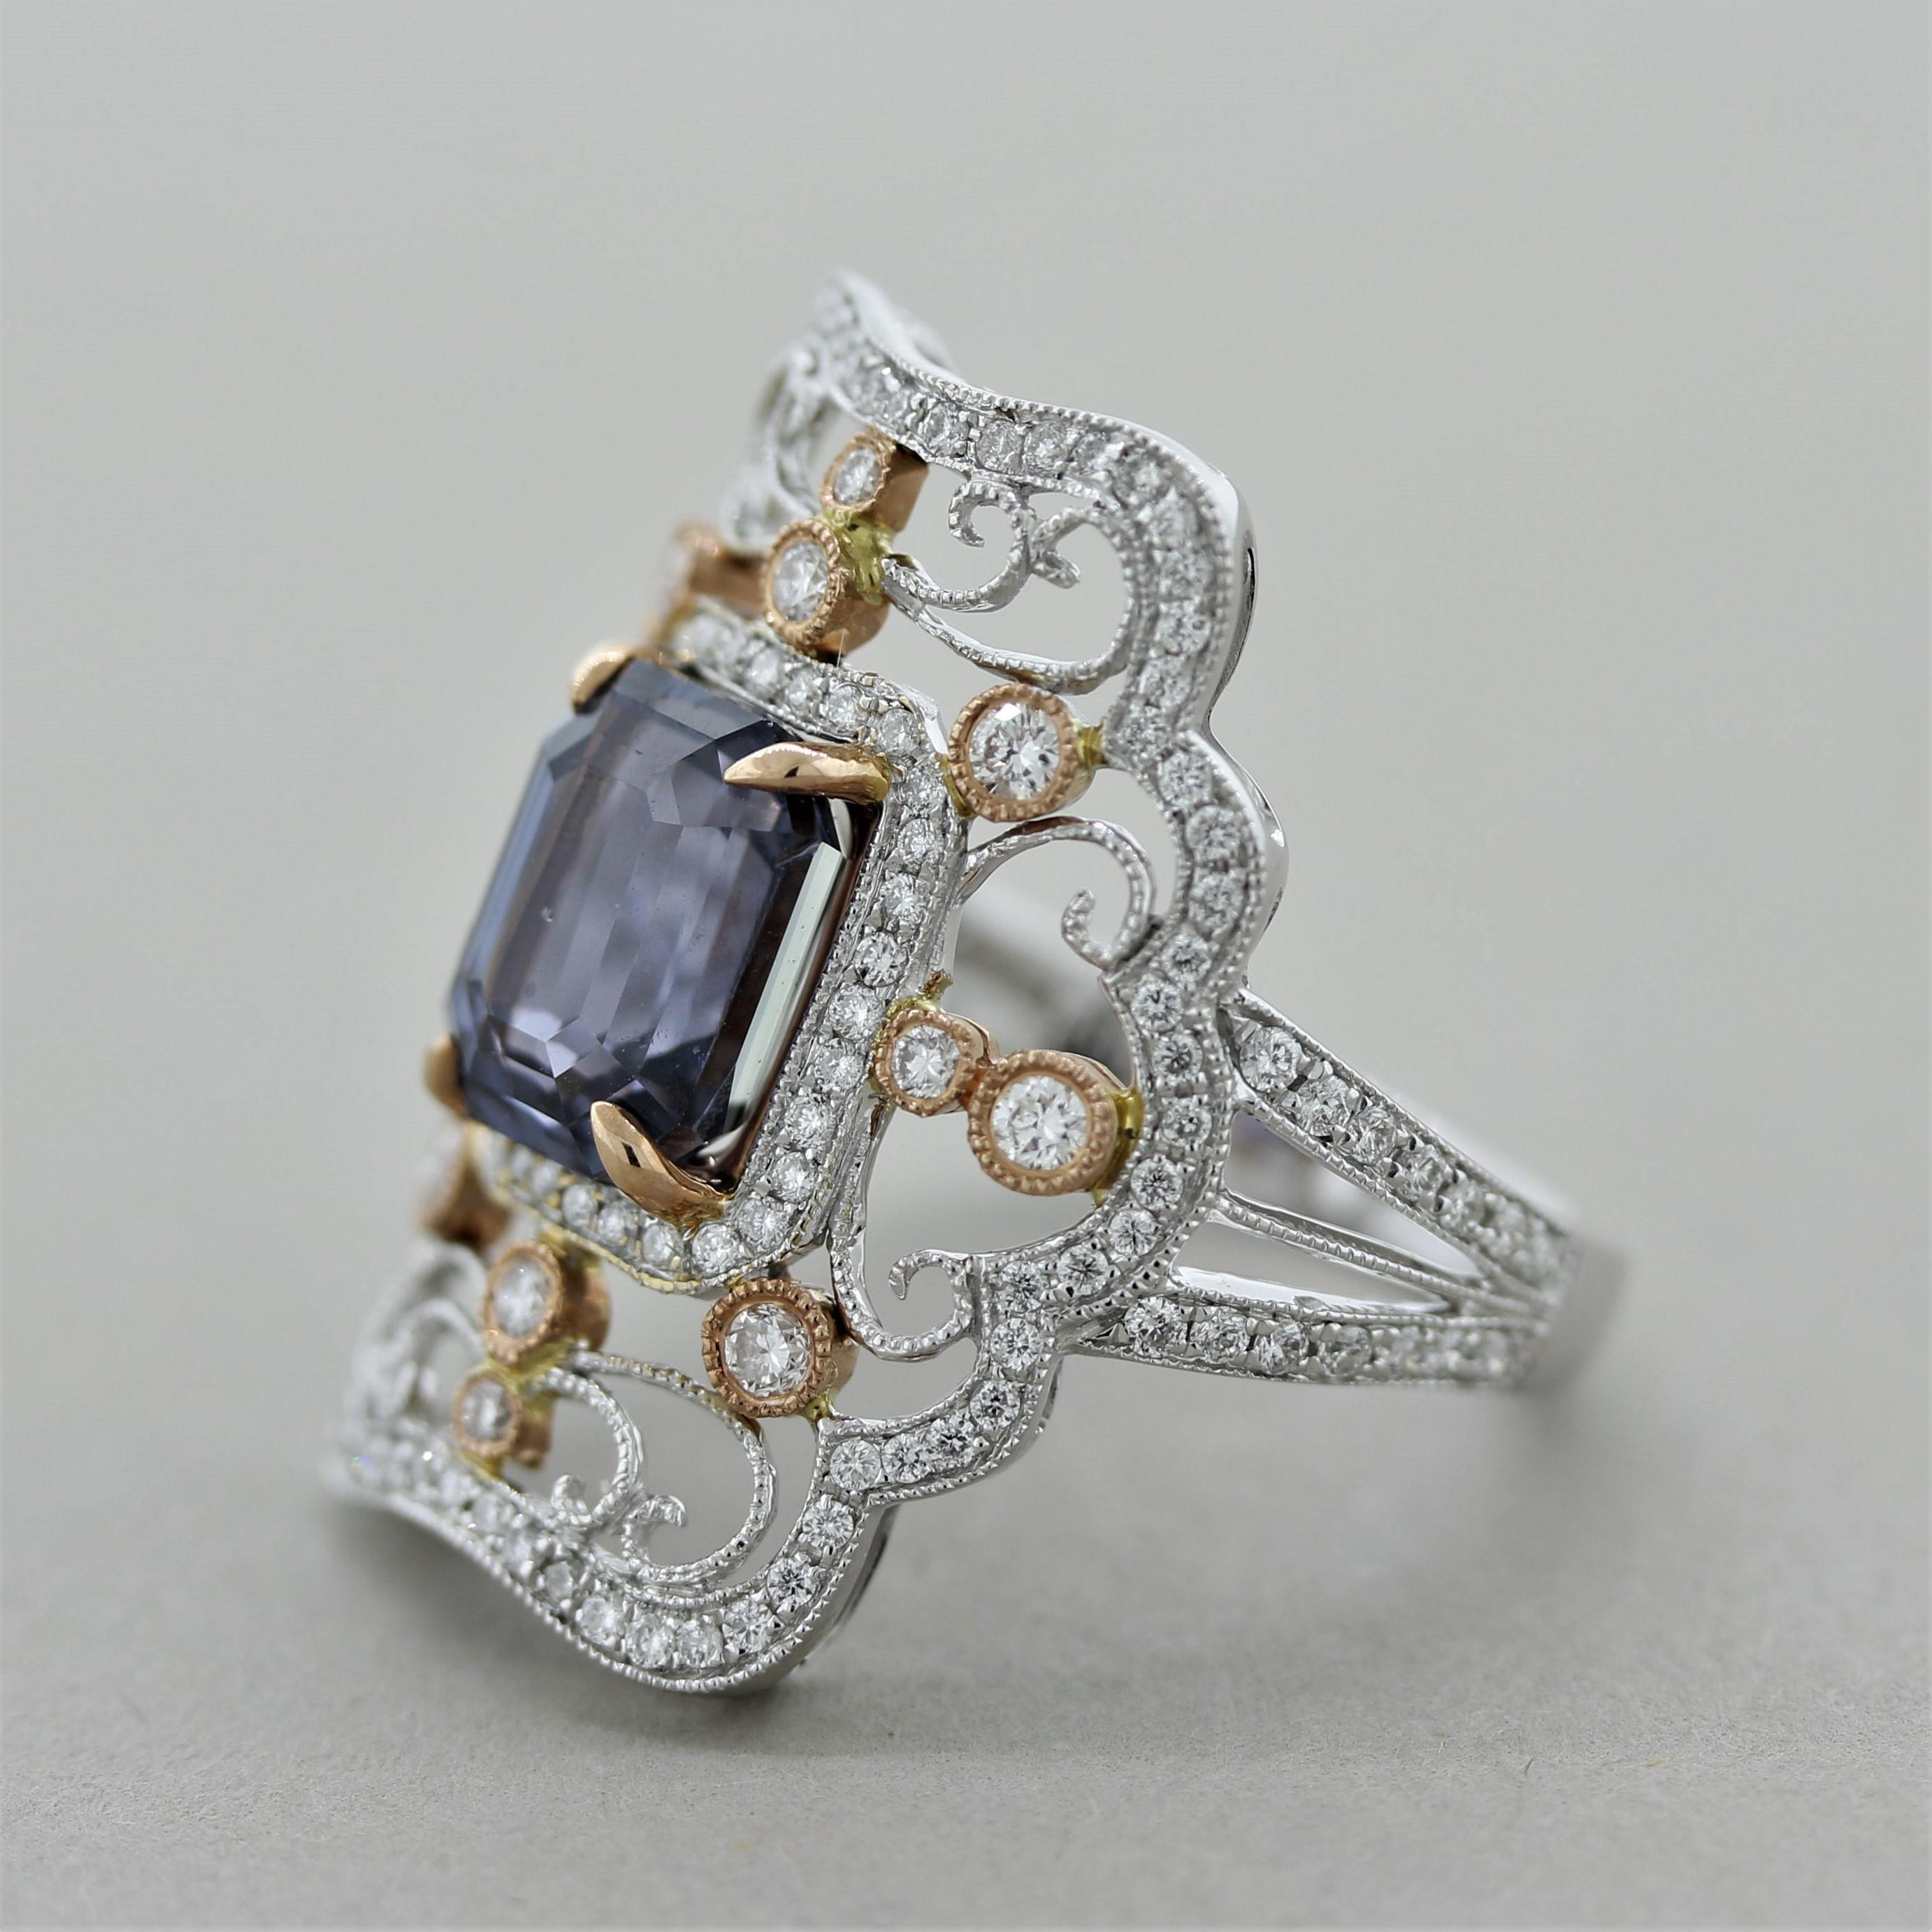 A new, sleek, and stylish ring designed in the antique style! It features a 4.06 carat emerald-cut color-change sapphire. It has a soft and bright blue color that changes to a violet/purple color under candlelight and other yellow lights. It is